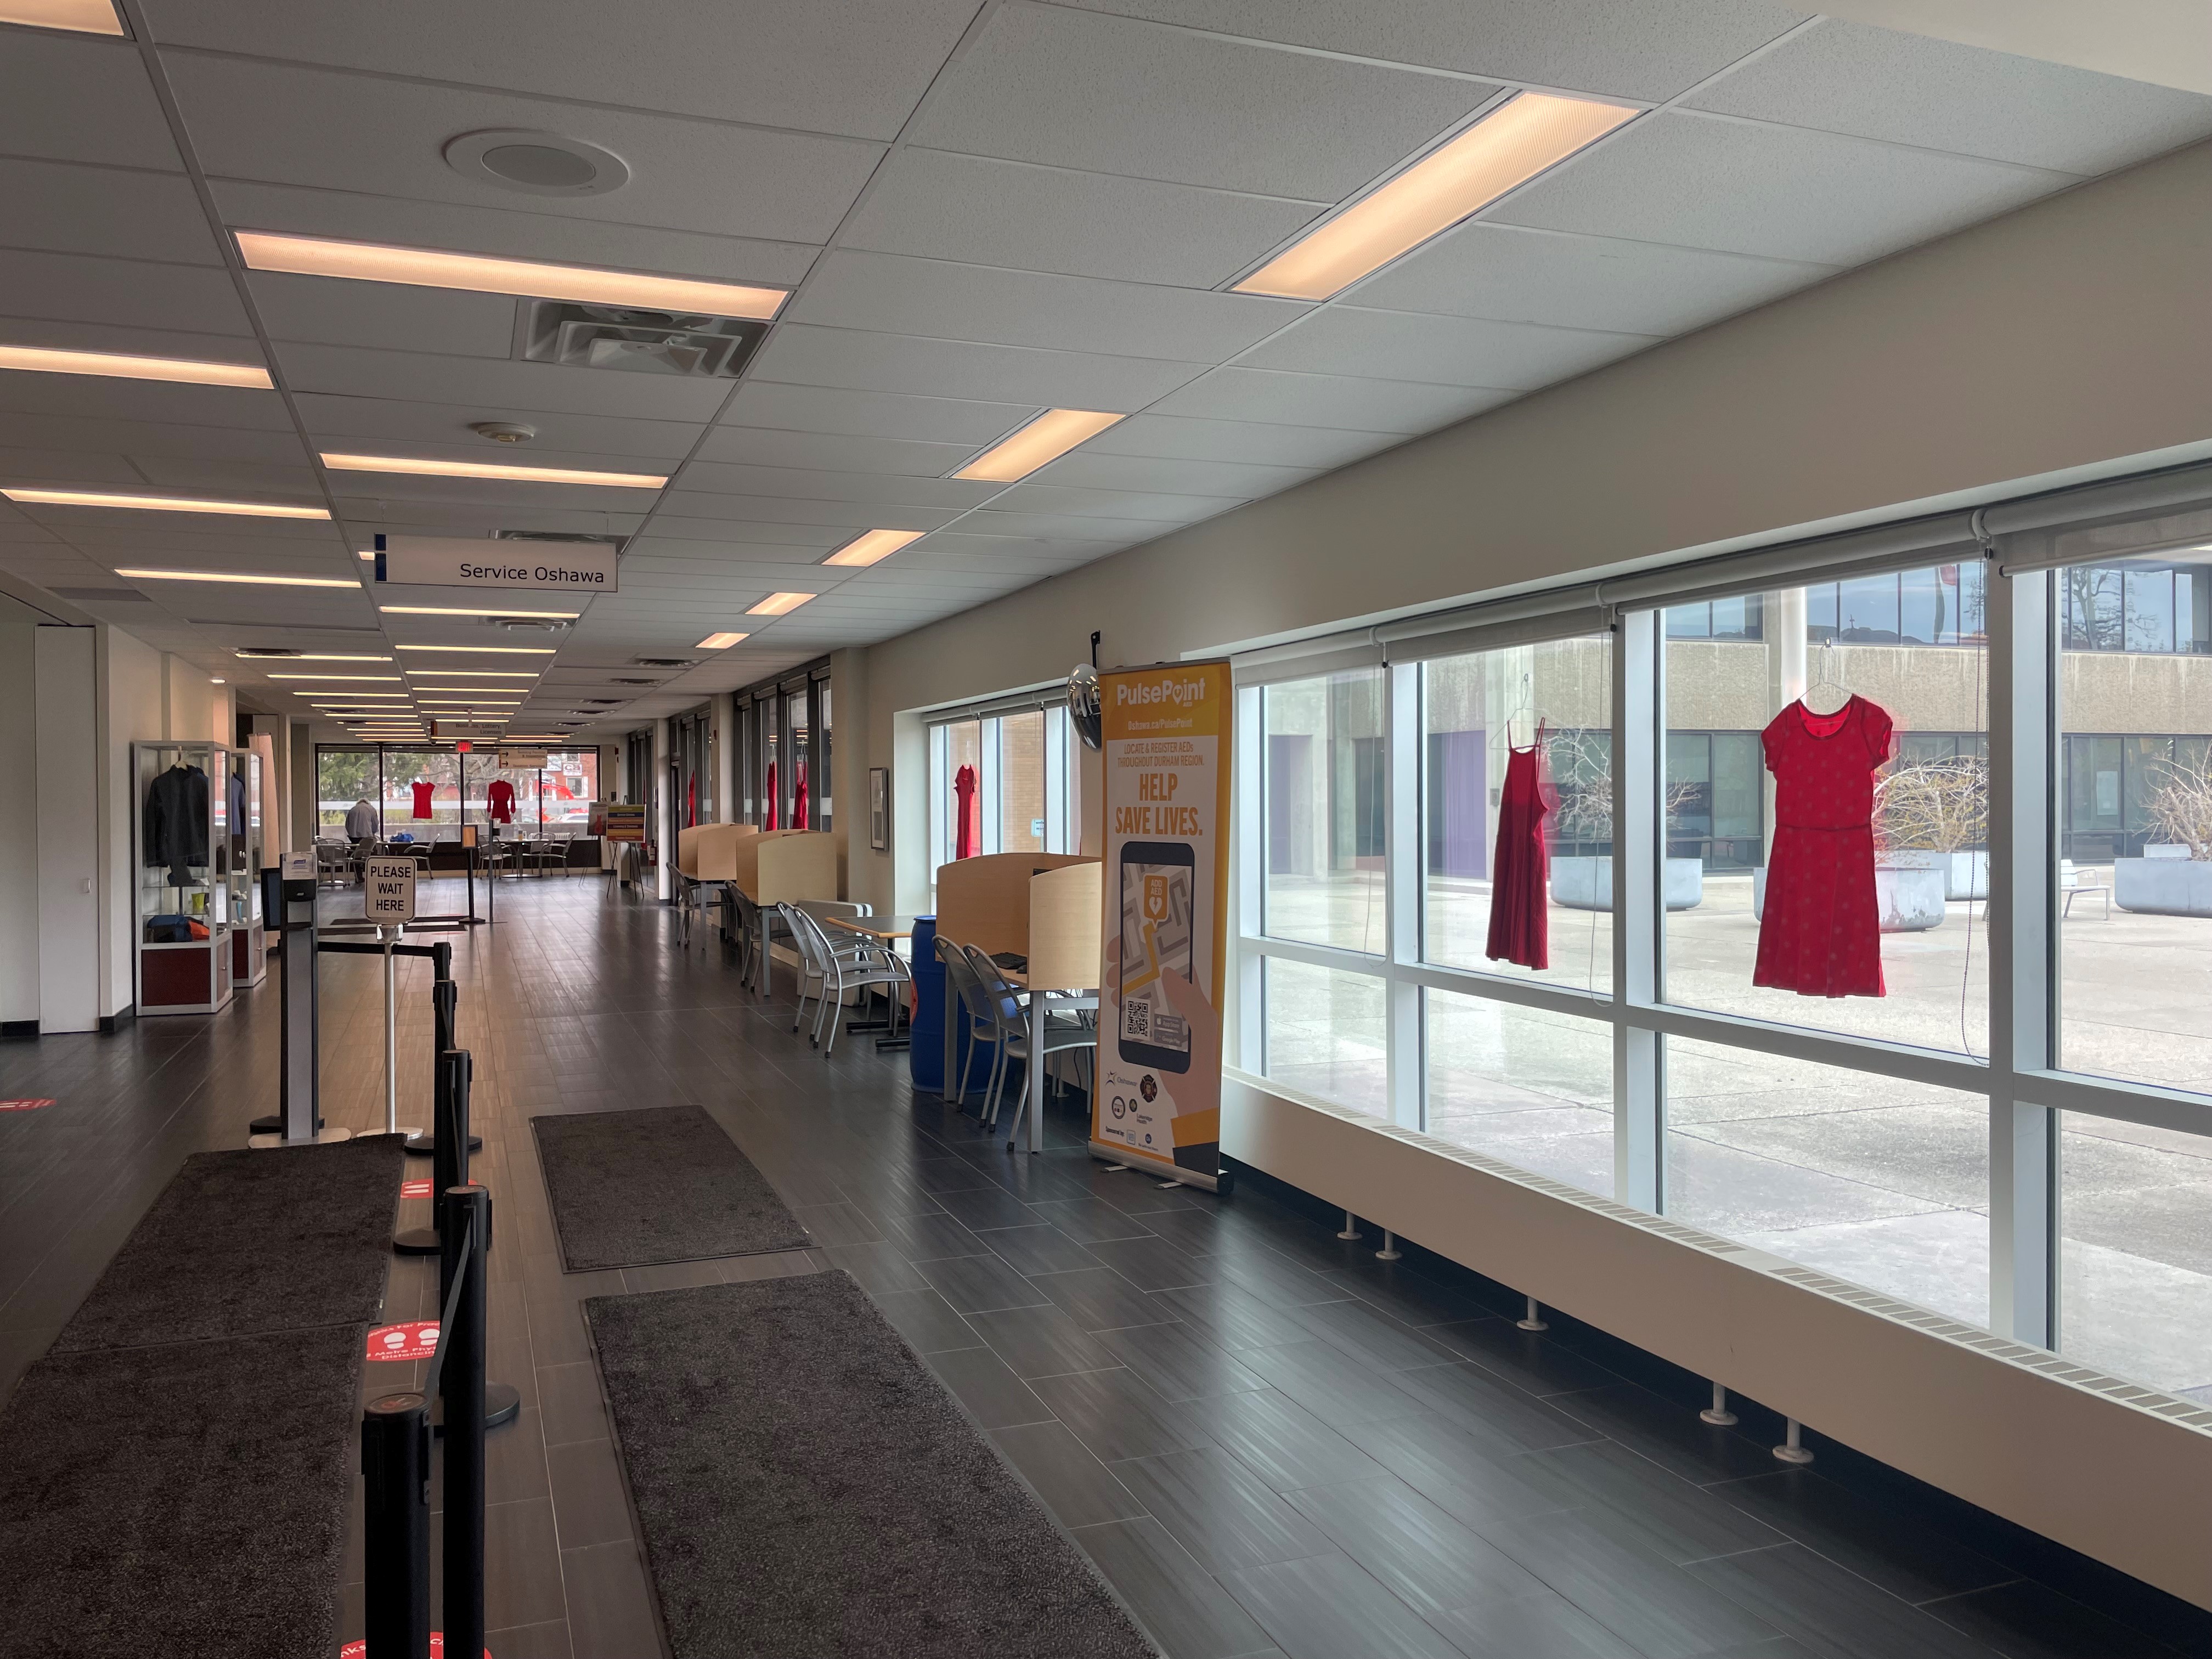 Image of Service Oshawa Hallway with red dresses lining the windows for reddress day